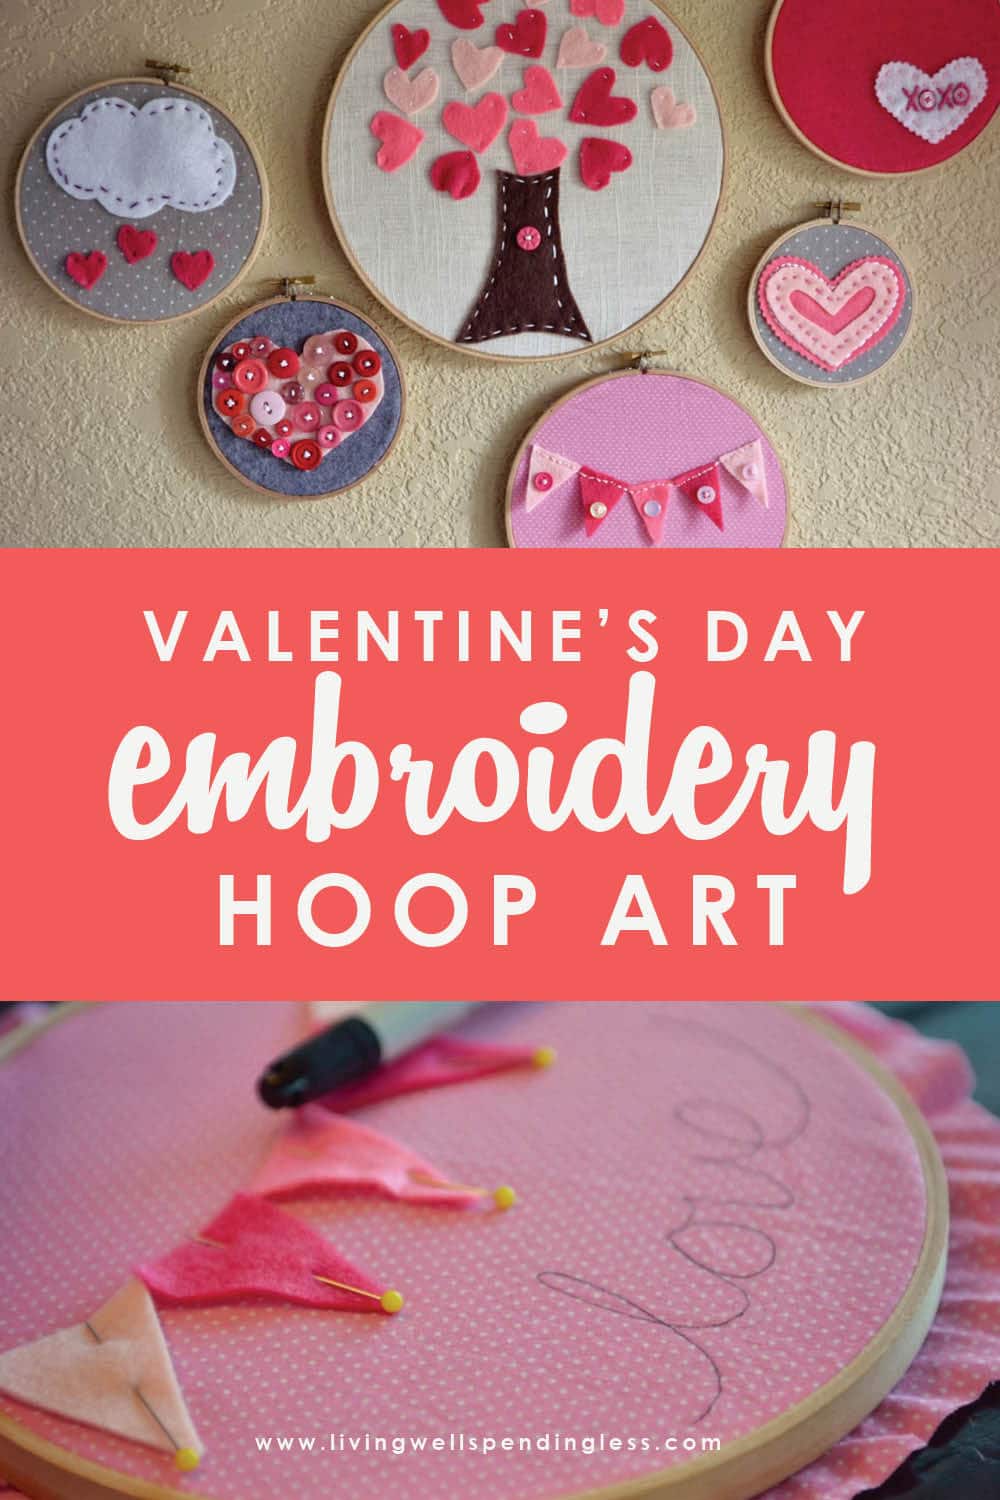 Valentines Day Embroidery Hoop Art Simple Embroidery Tutorial